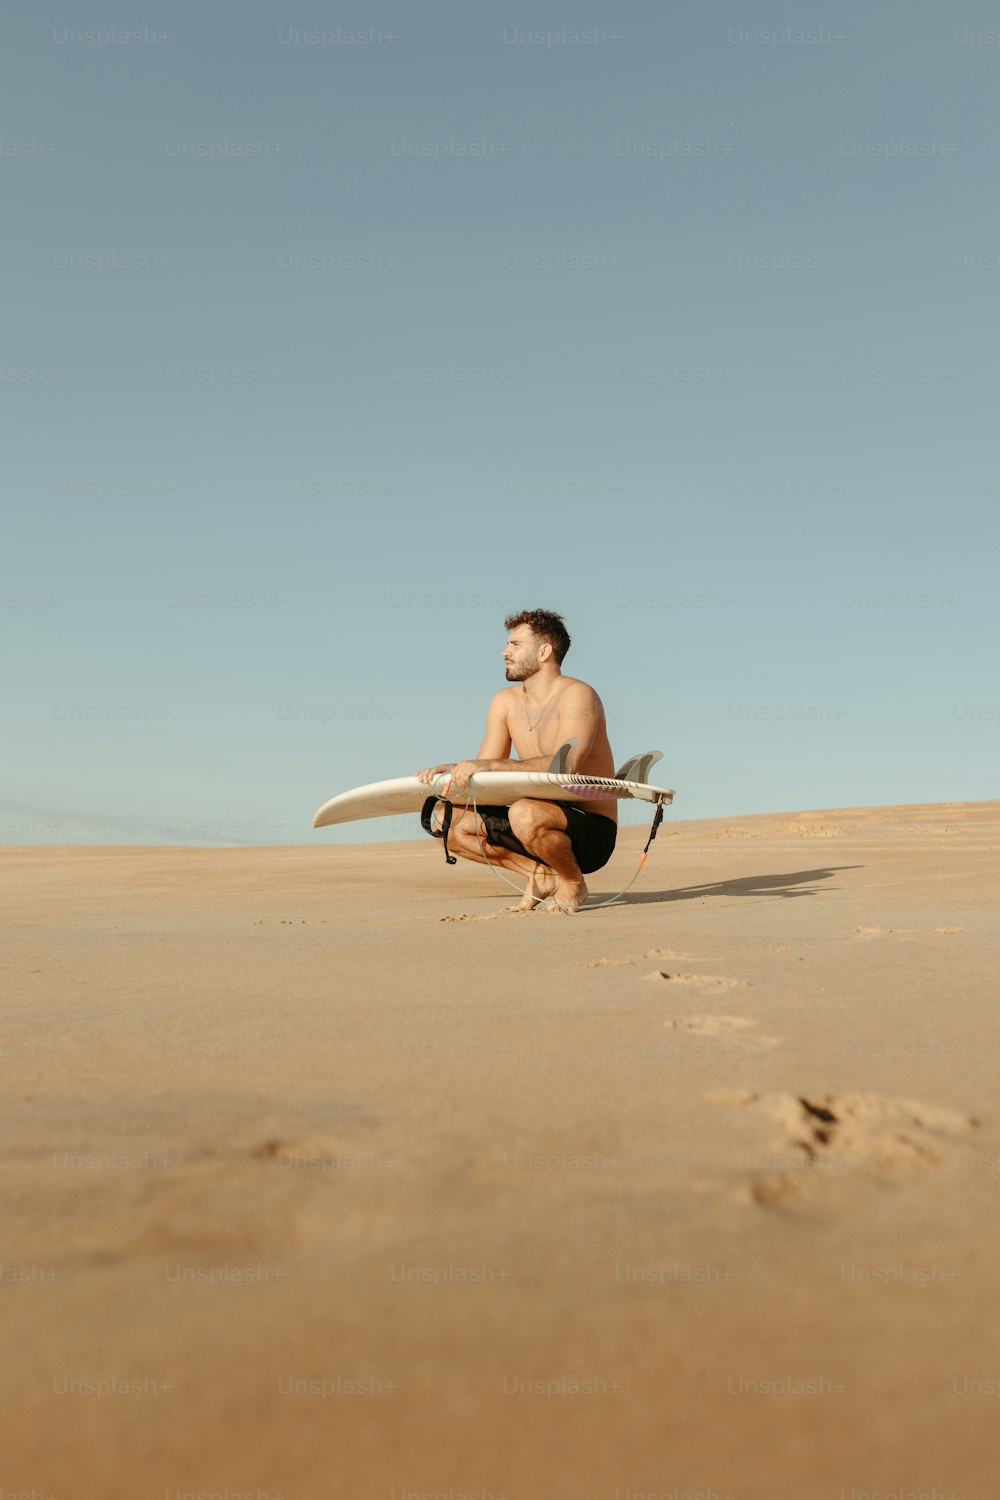 a man kneeling down while holding a surfboard